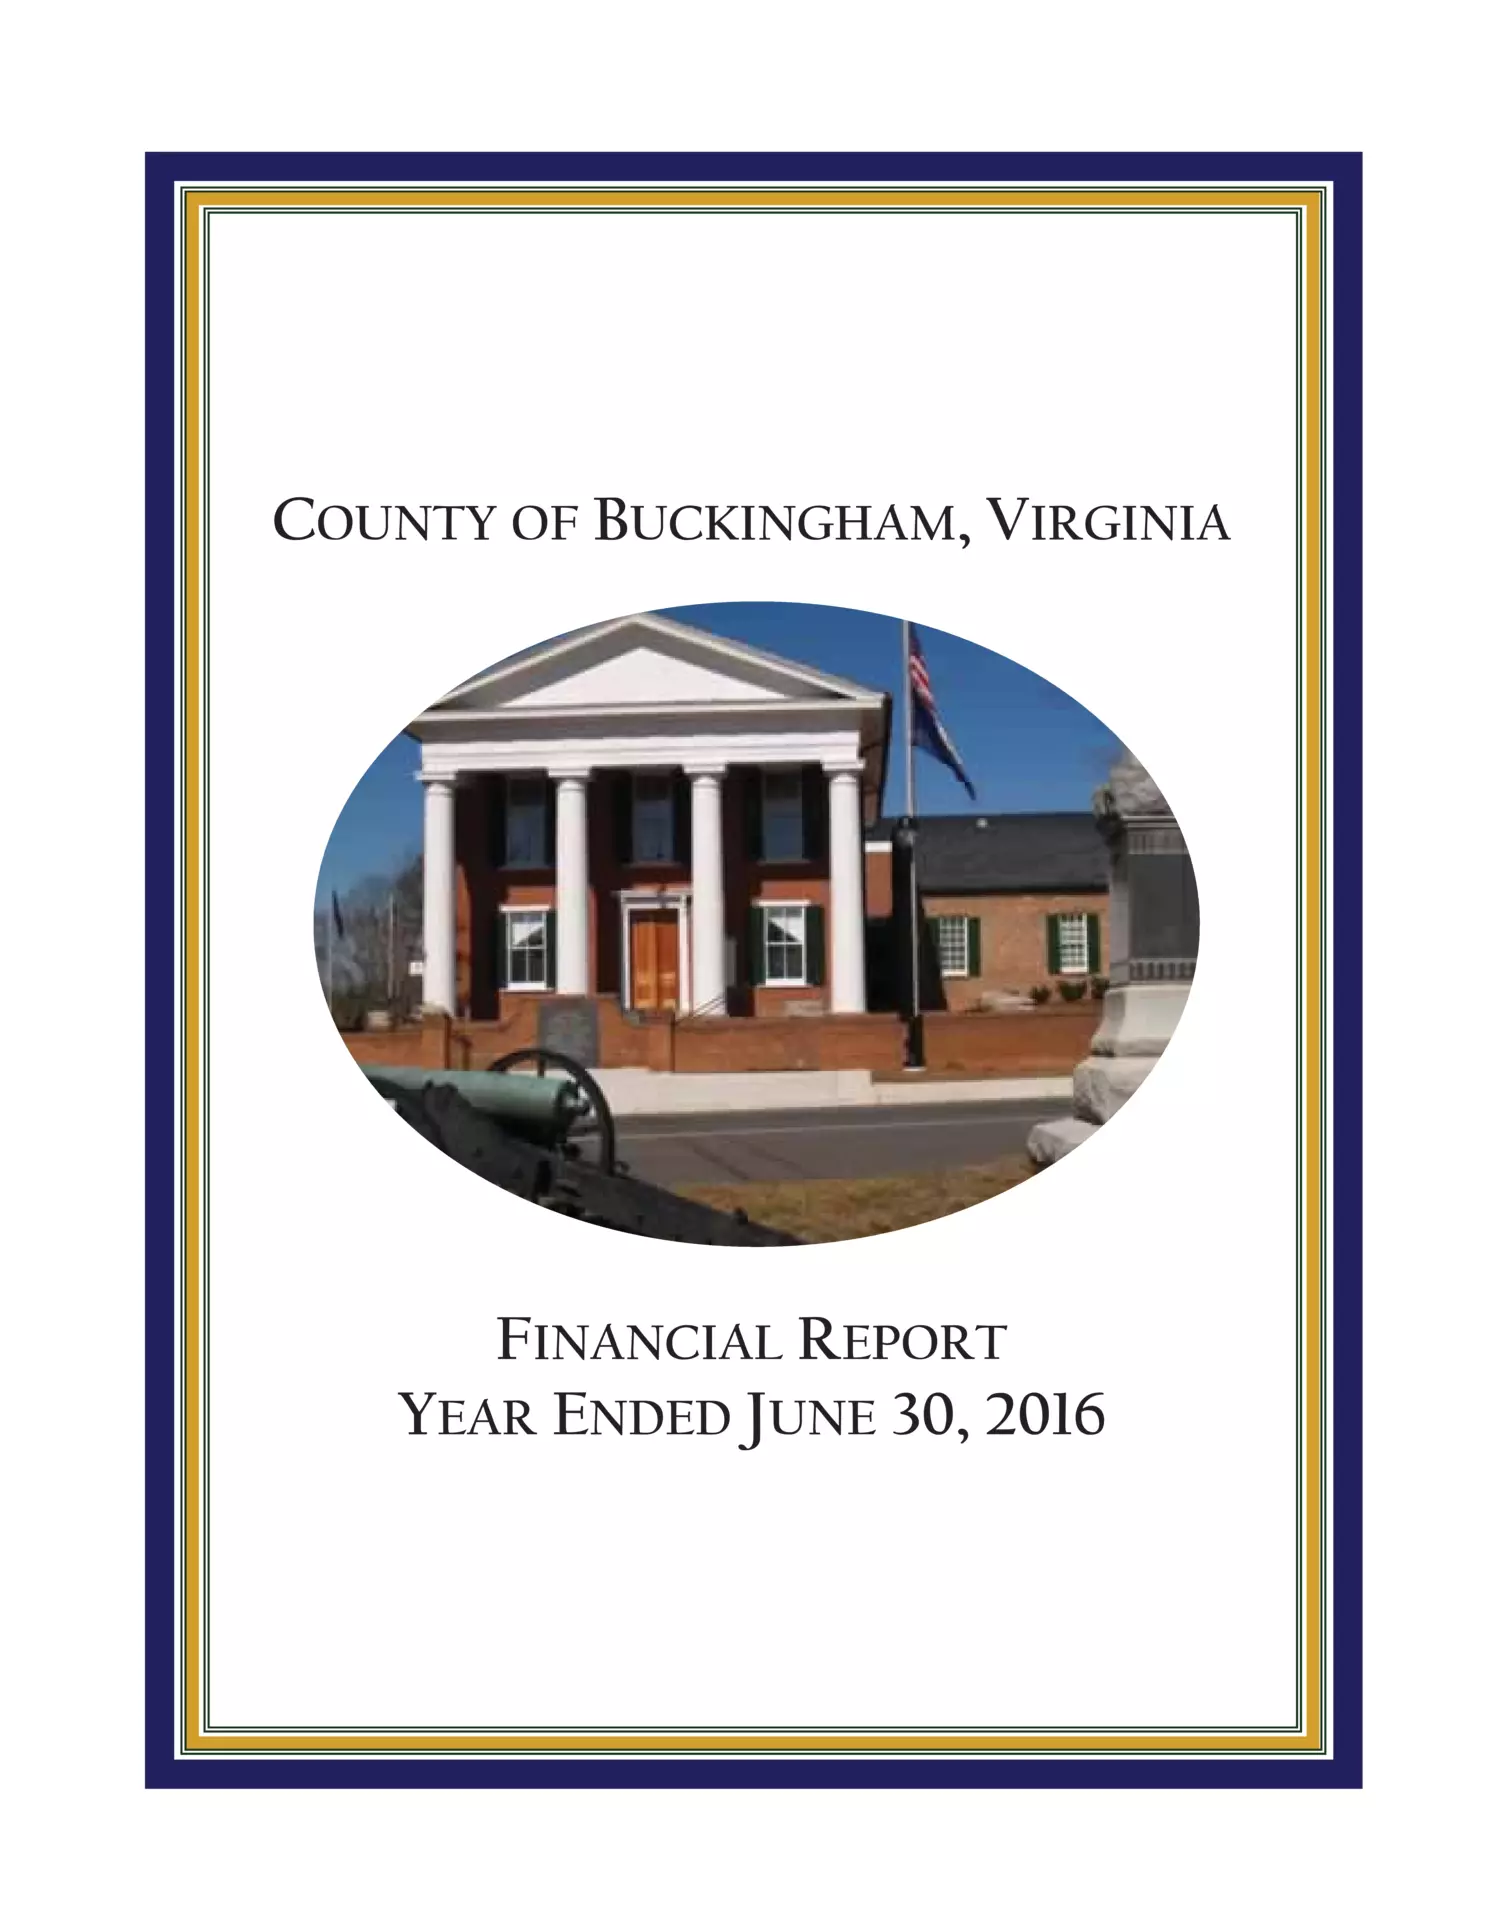 2016 Annual Financial Report for County of Buckingham